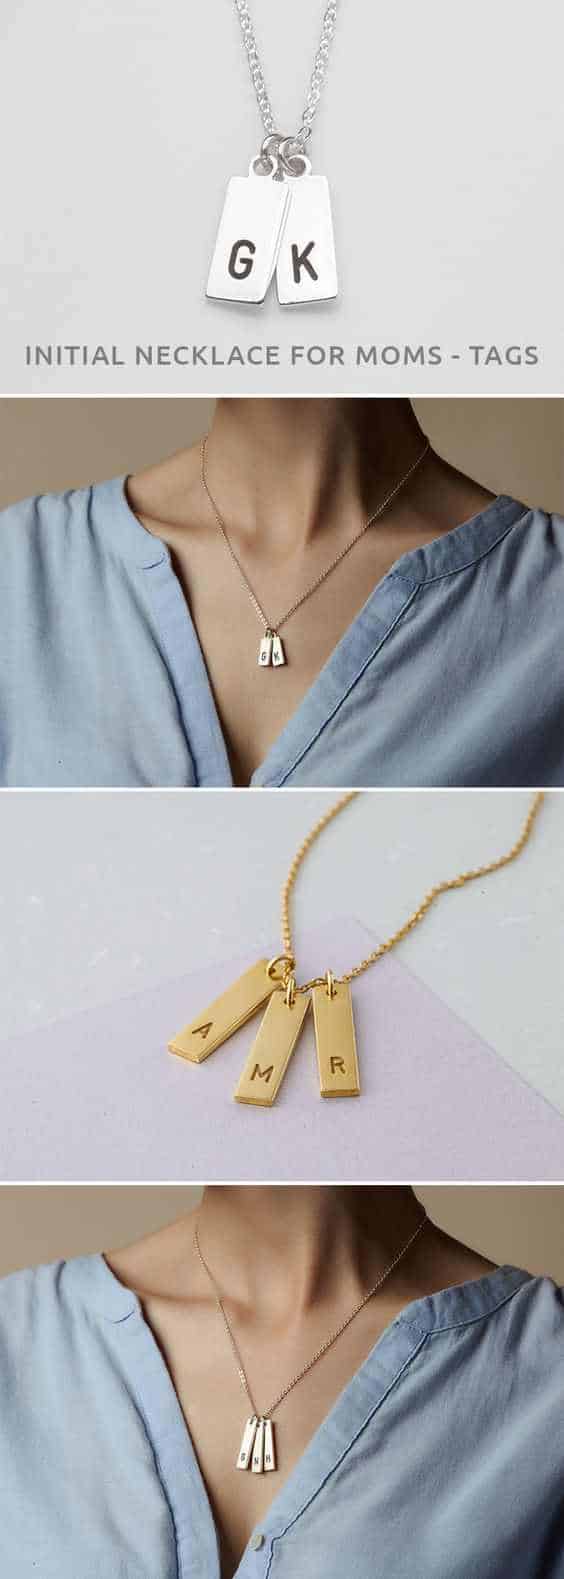 Personalized initials necklace